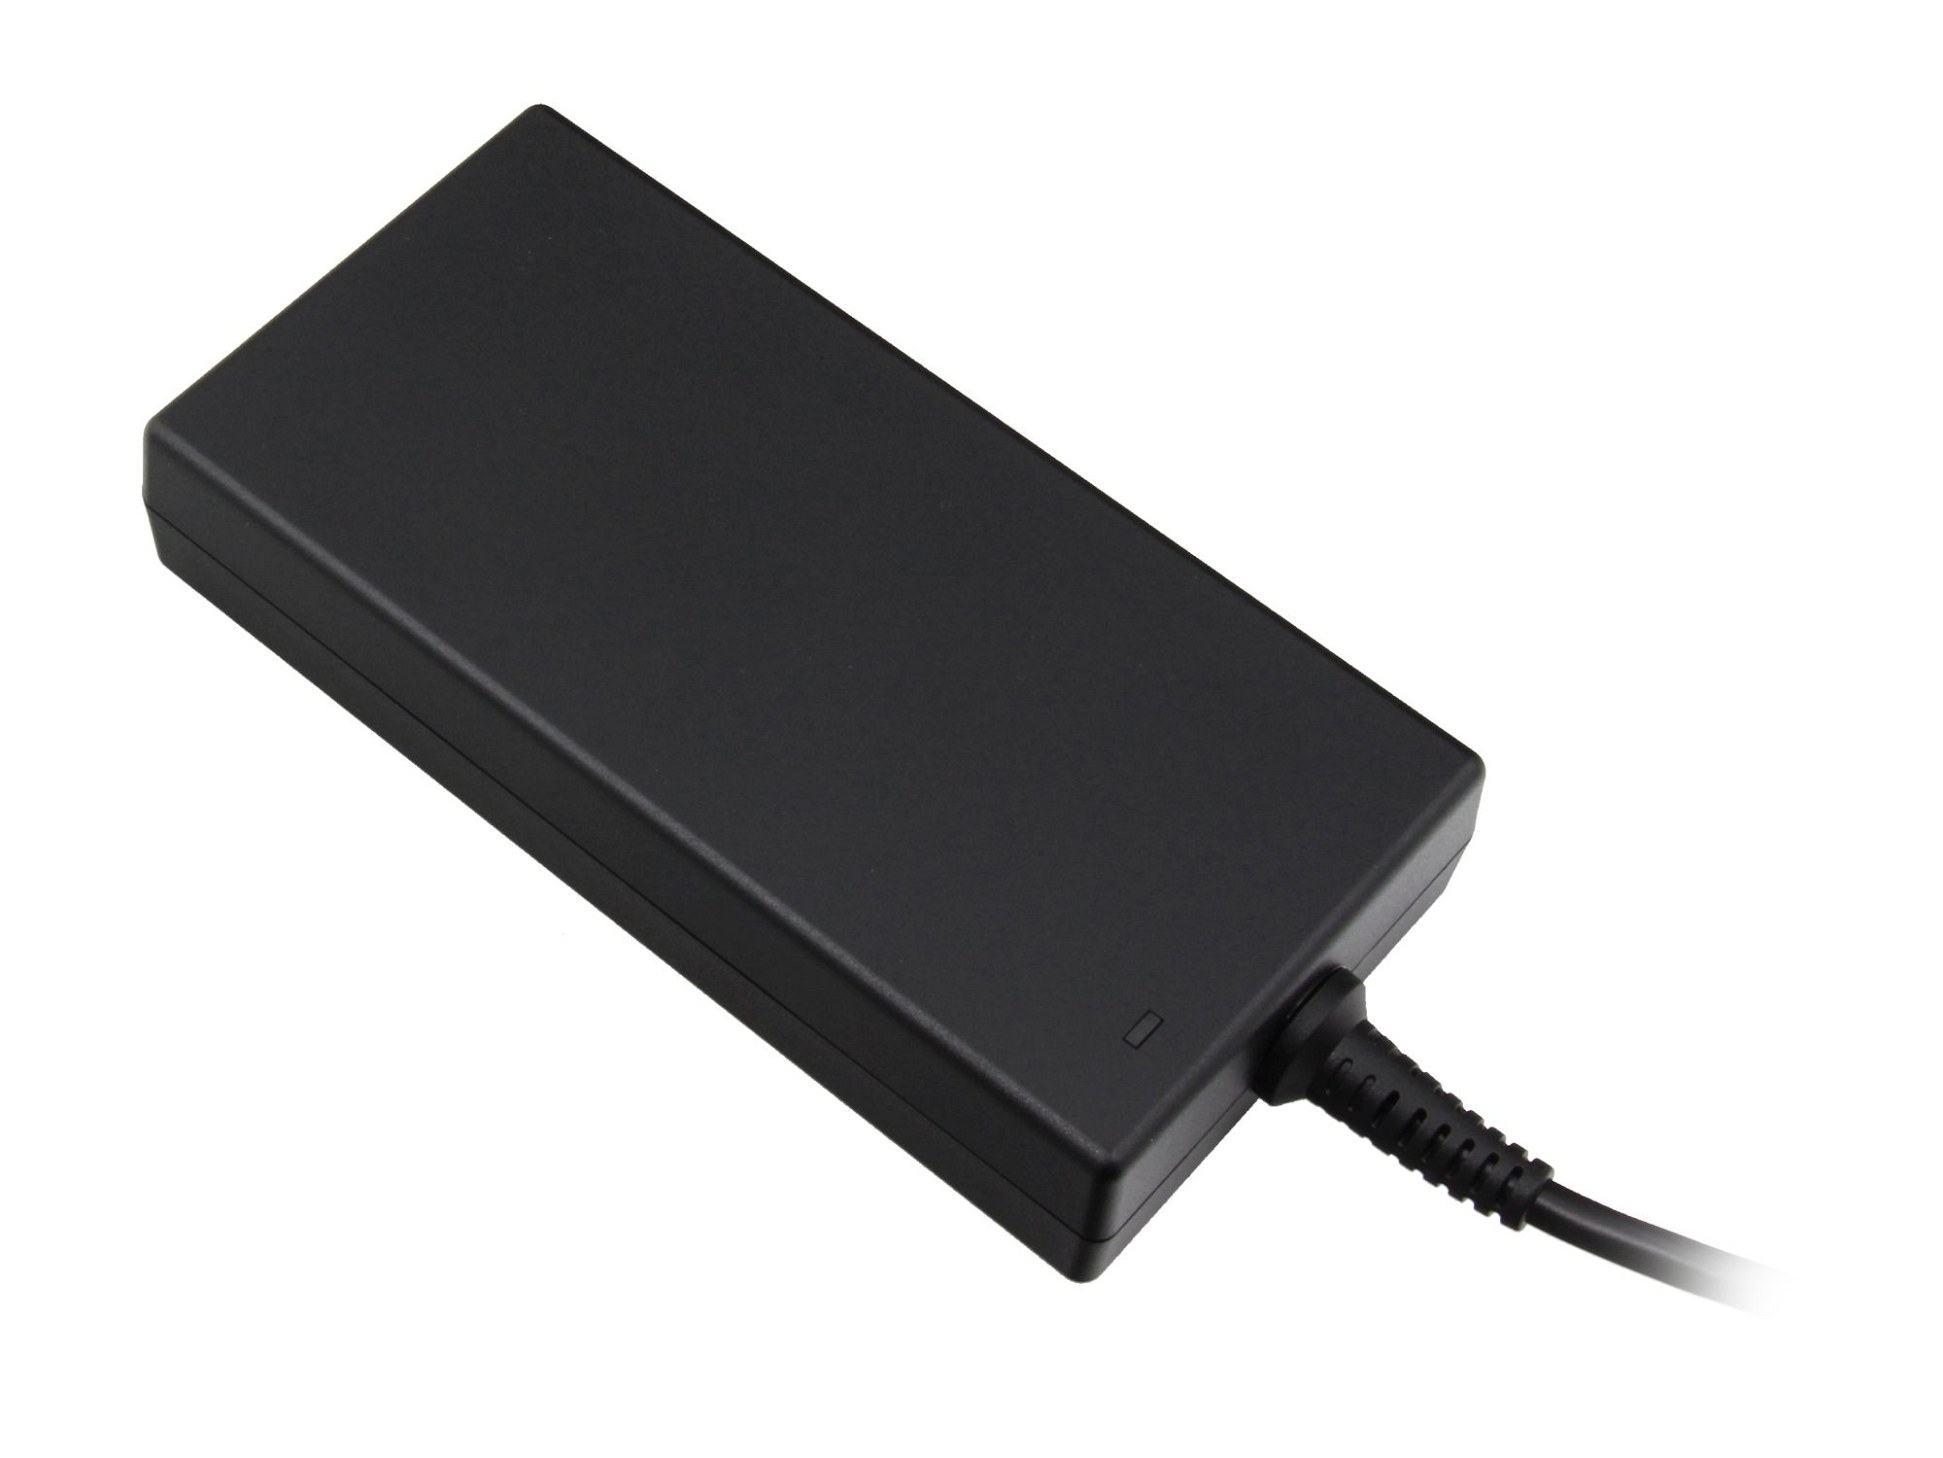 Dell XPS (M2010) original chargeur 180 watts mince